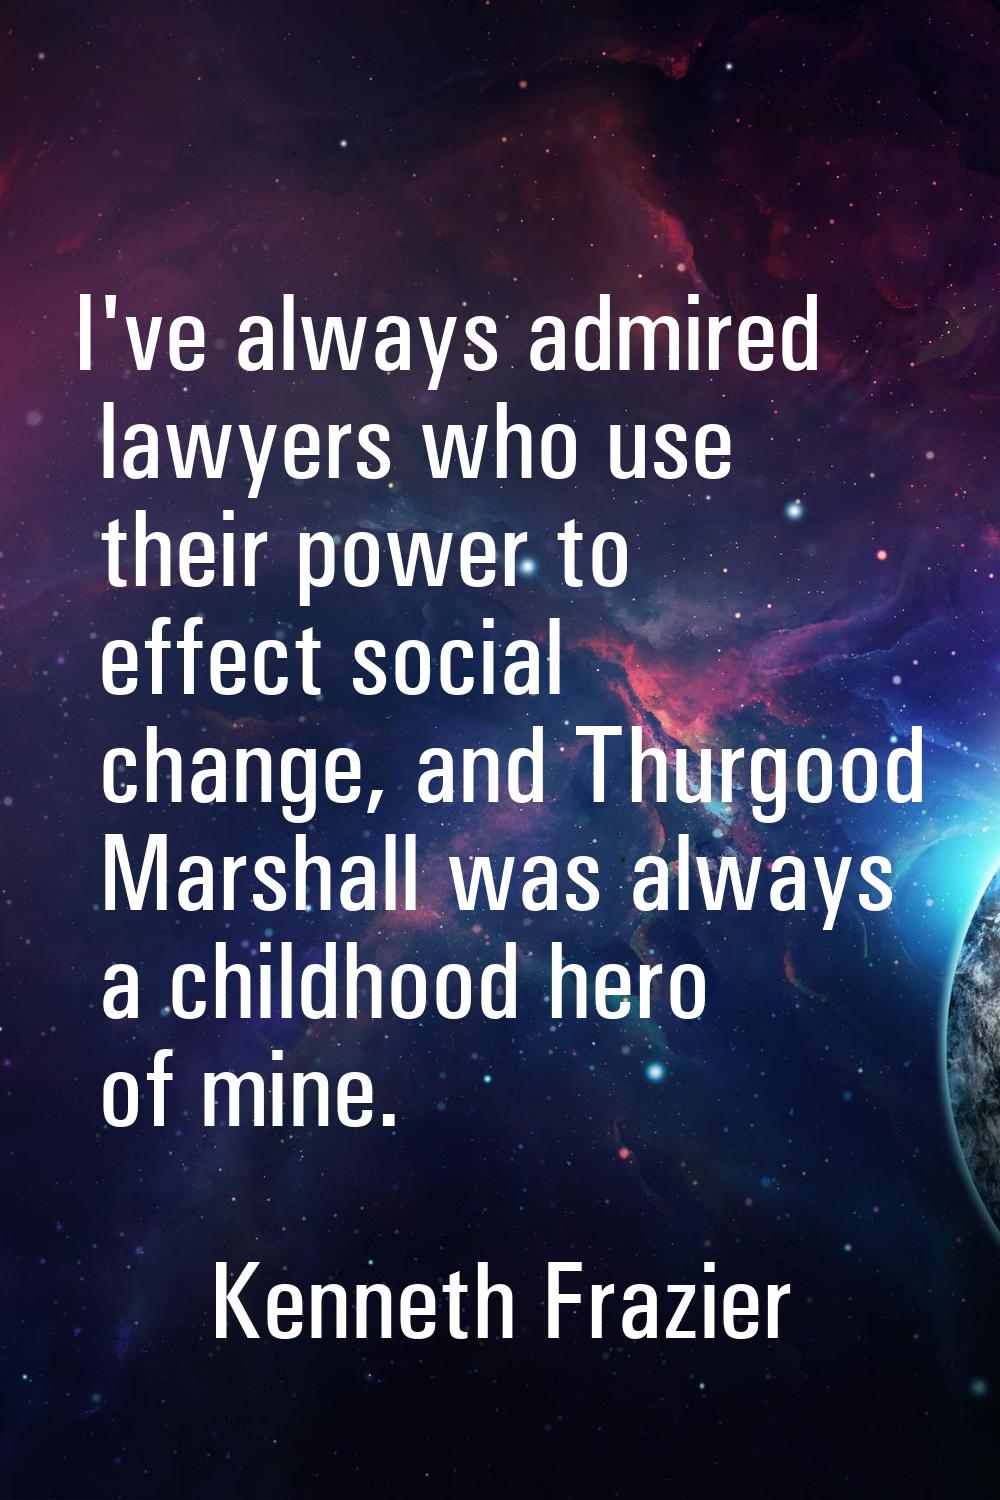 I've always admired lawyers who use their power to effect social change, and Thurgood Marshall was 